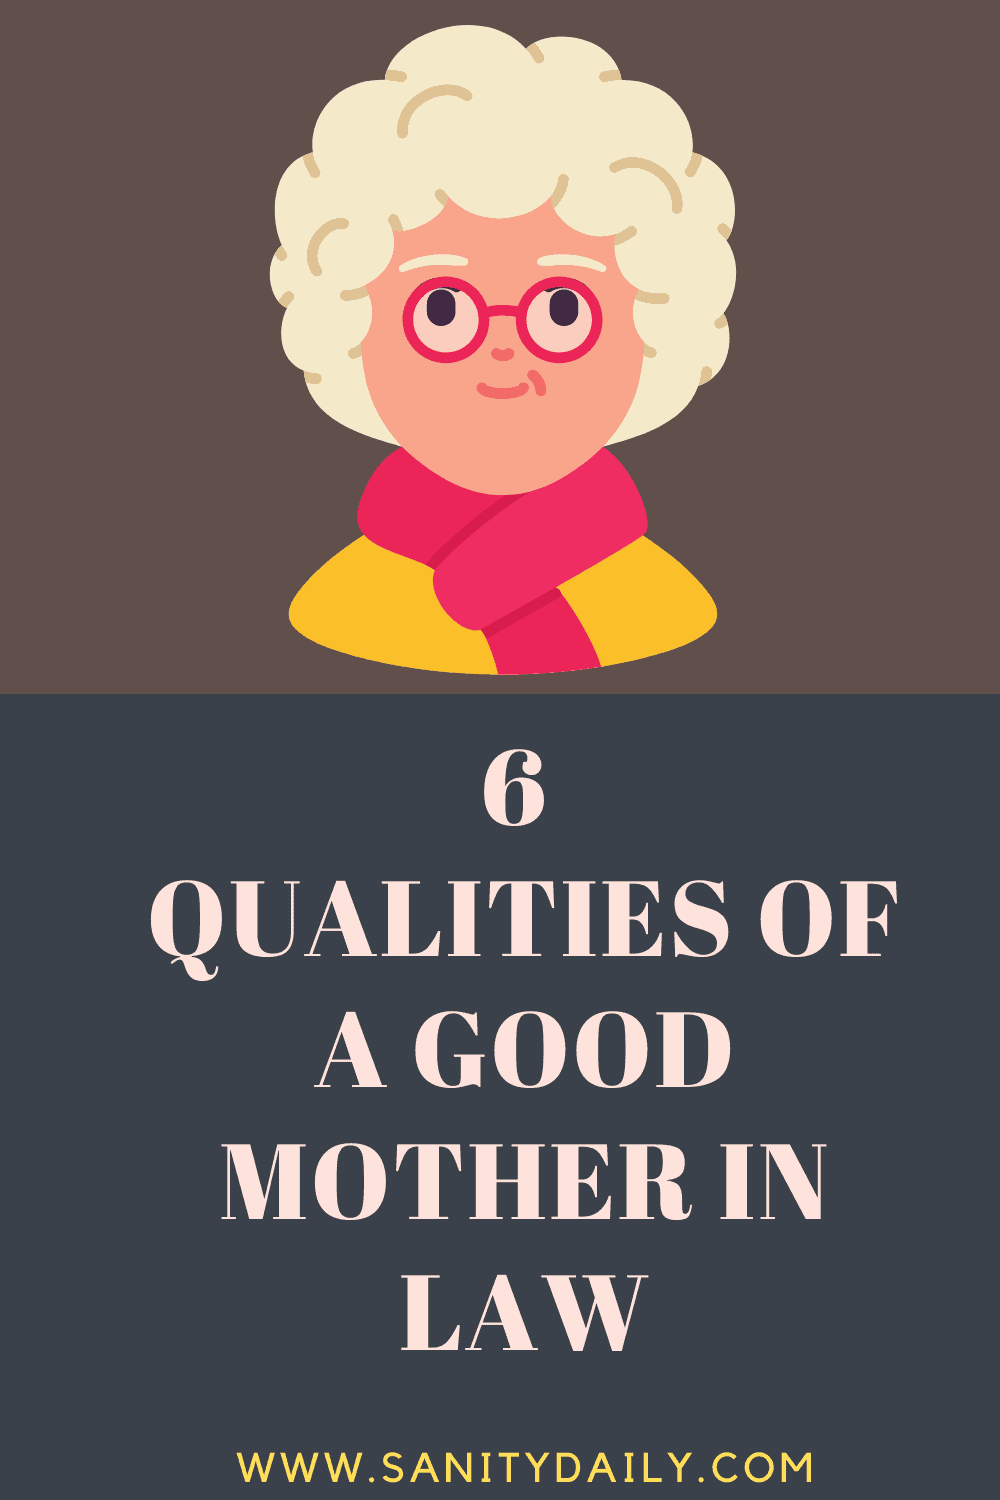 Qualities of a good mother in law